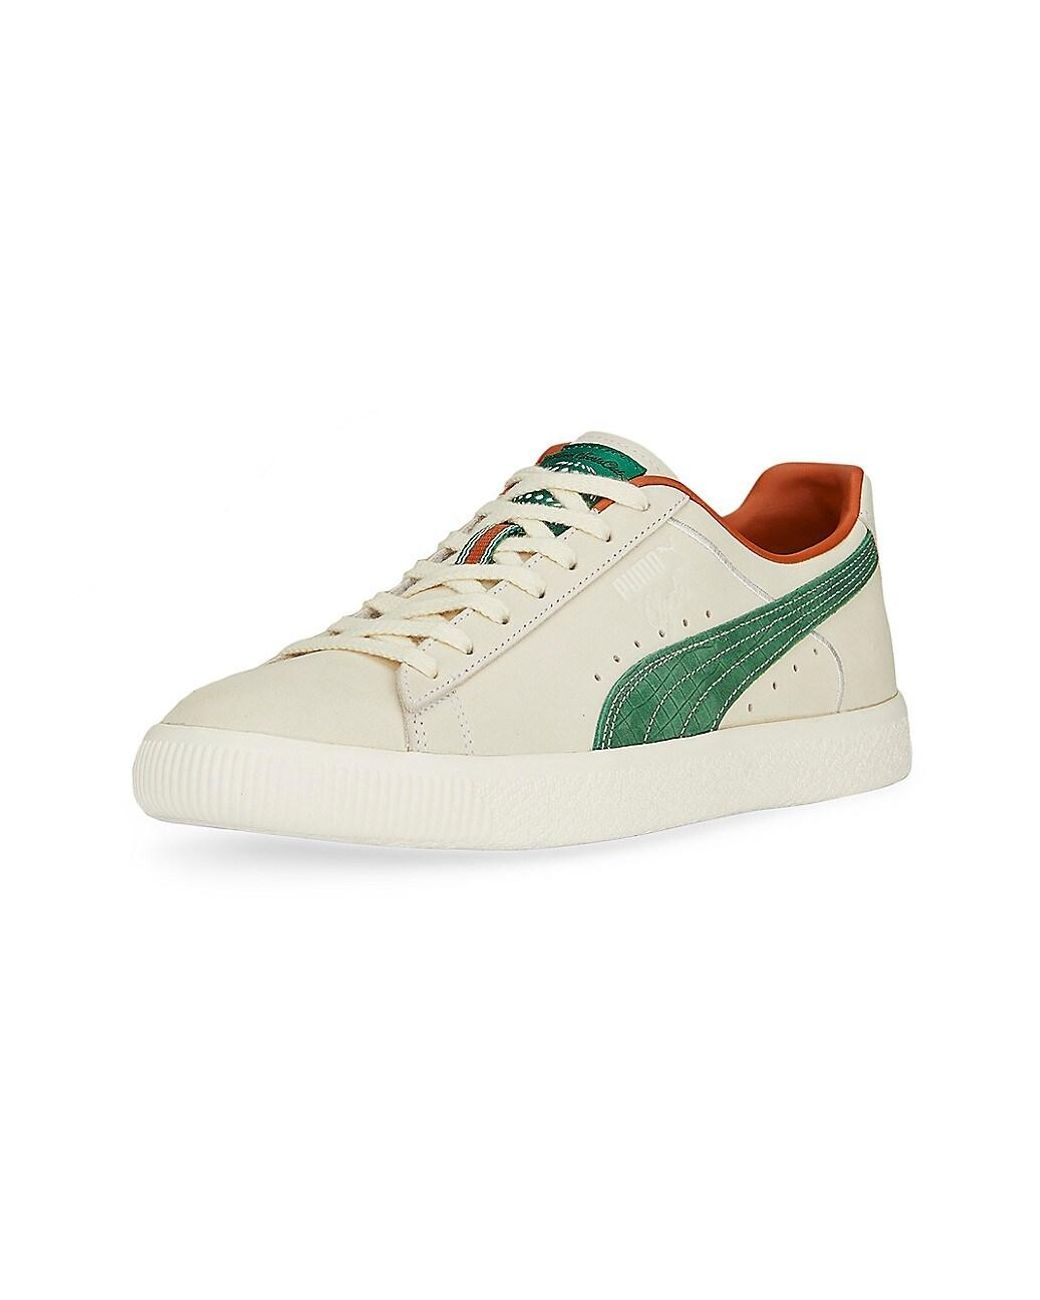 PUMA Clyde Fg Leather & Suede Sneakers for Men | Lyst